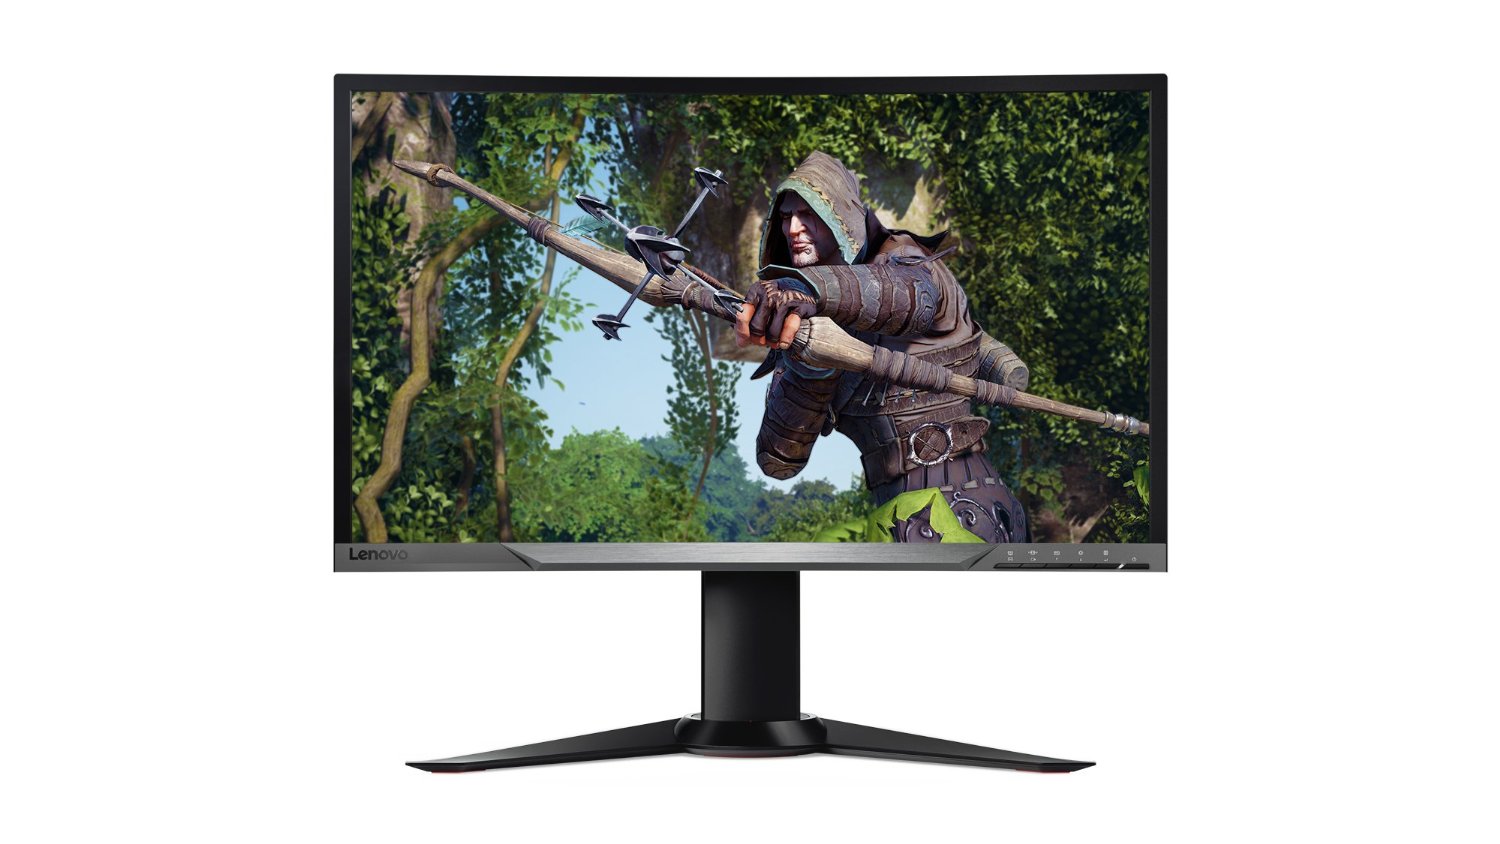 Lenovo Y27f Curved Gaming Monitor